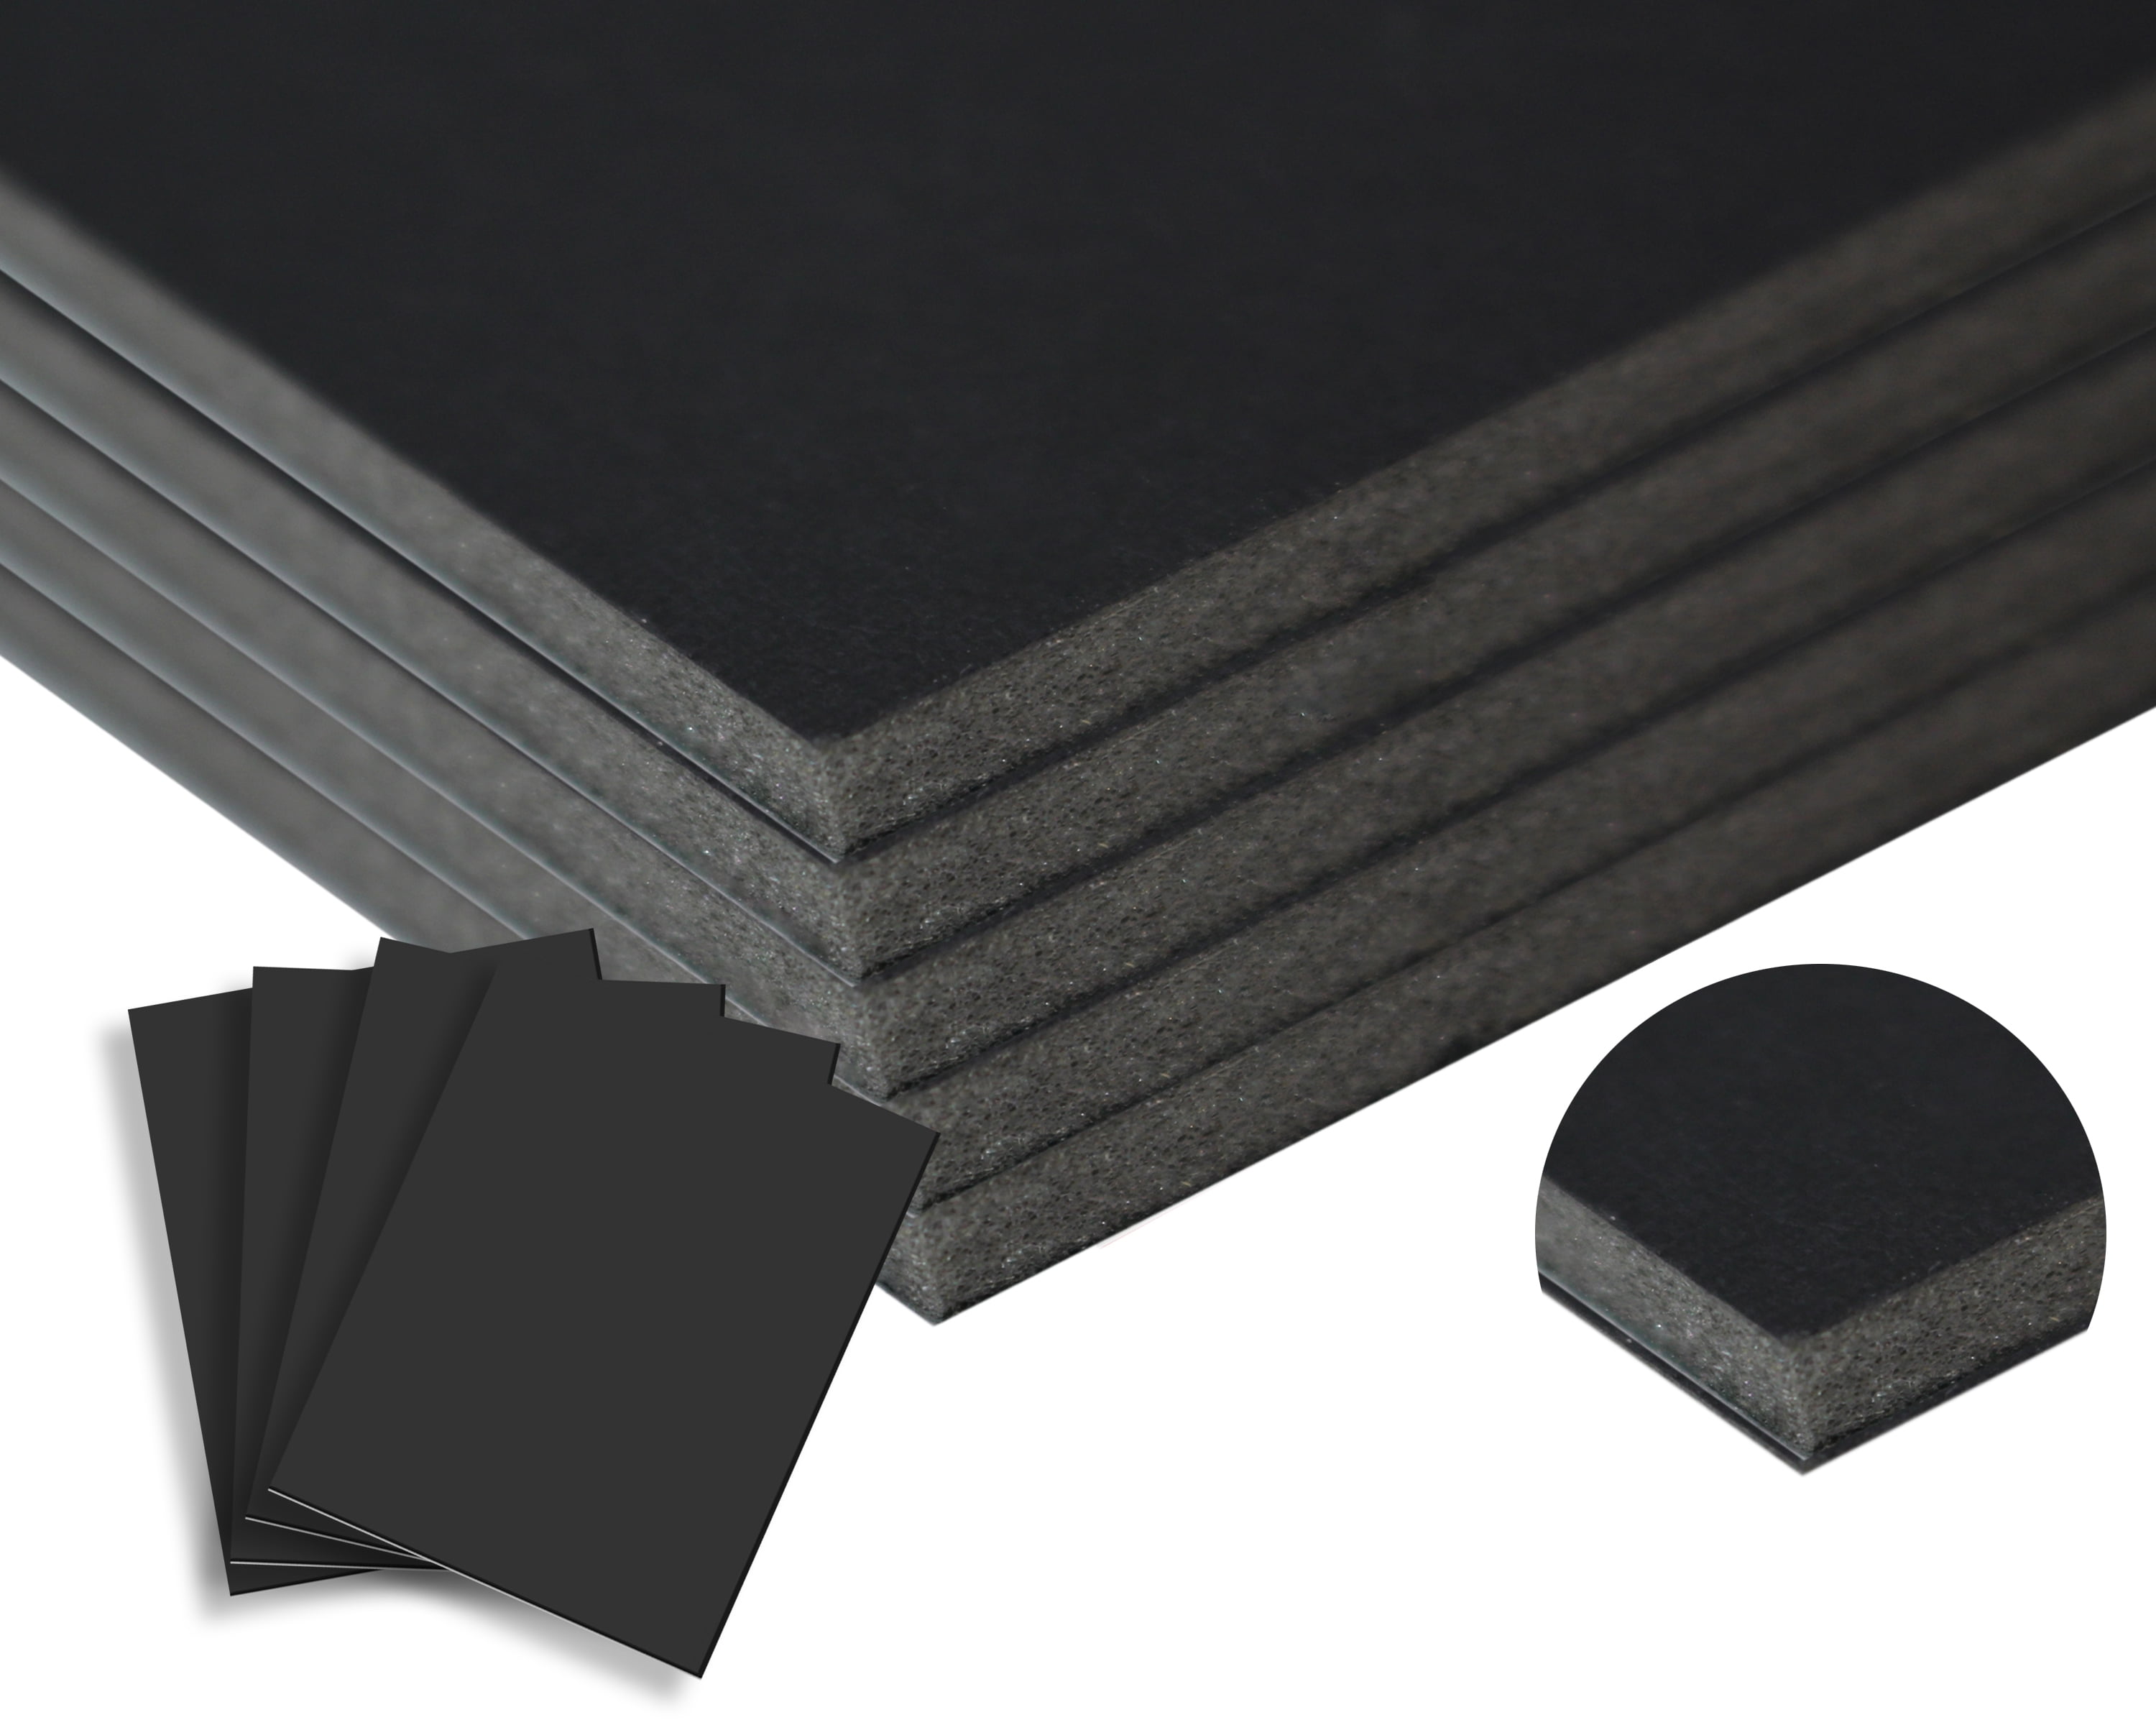 Foam Core Backing Board 3/16 Black 12x24- 5 Pack. Many Sizes Available.  Acid Free Buffered Craft Poster Board for Signs, Presentations, School